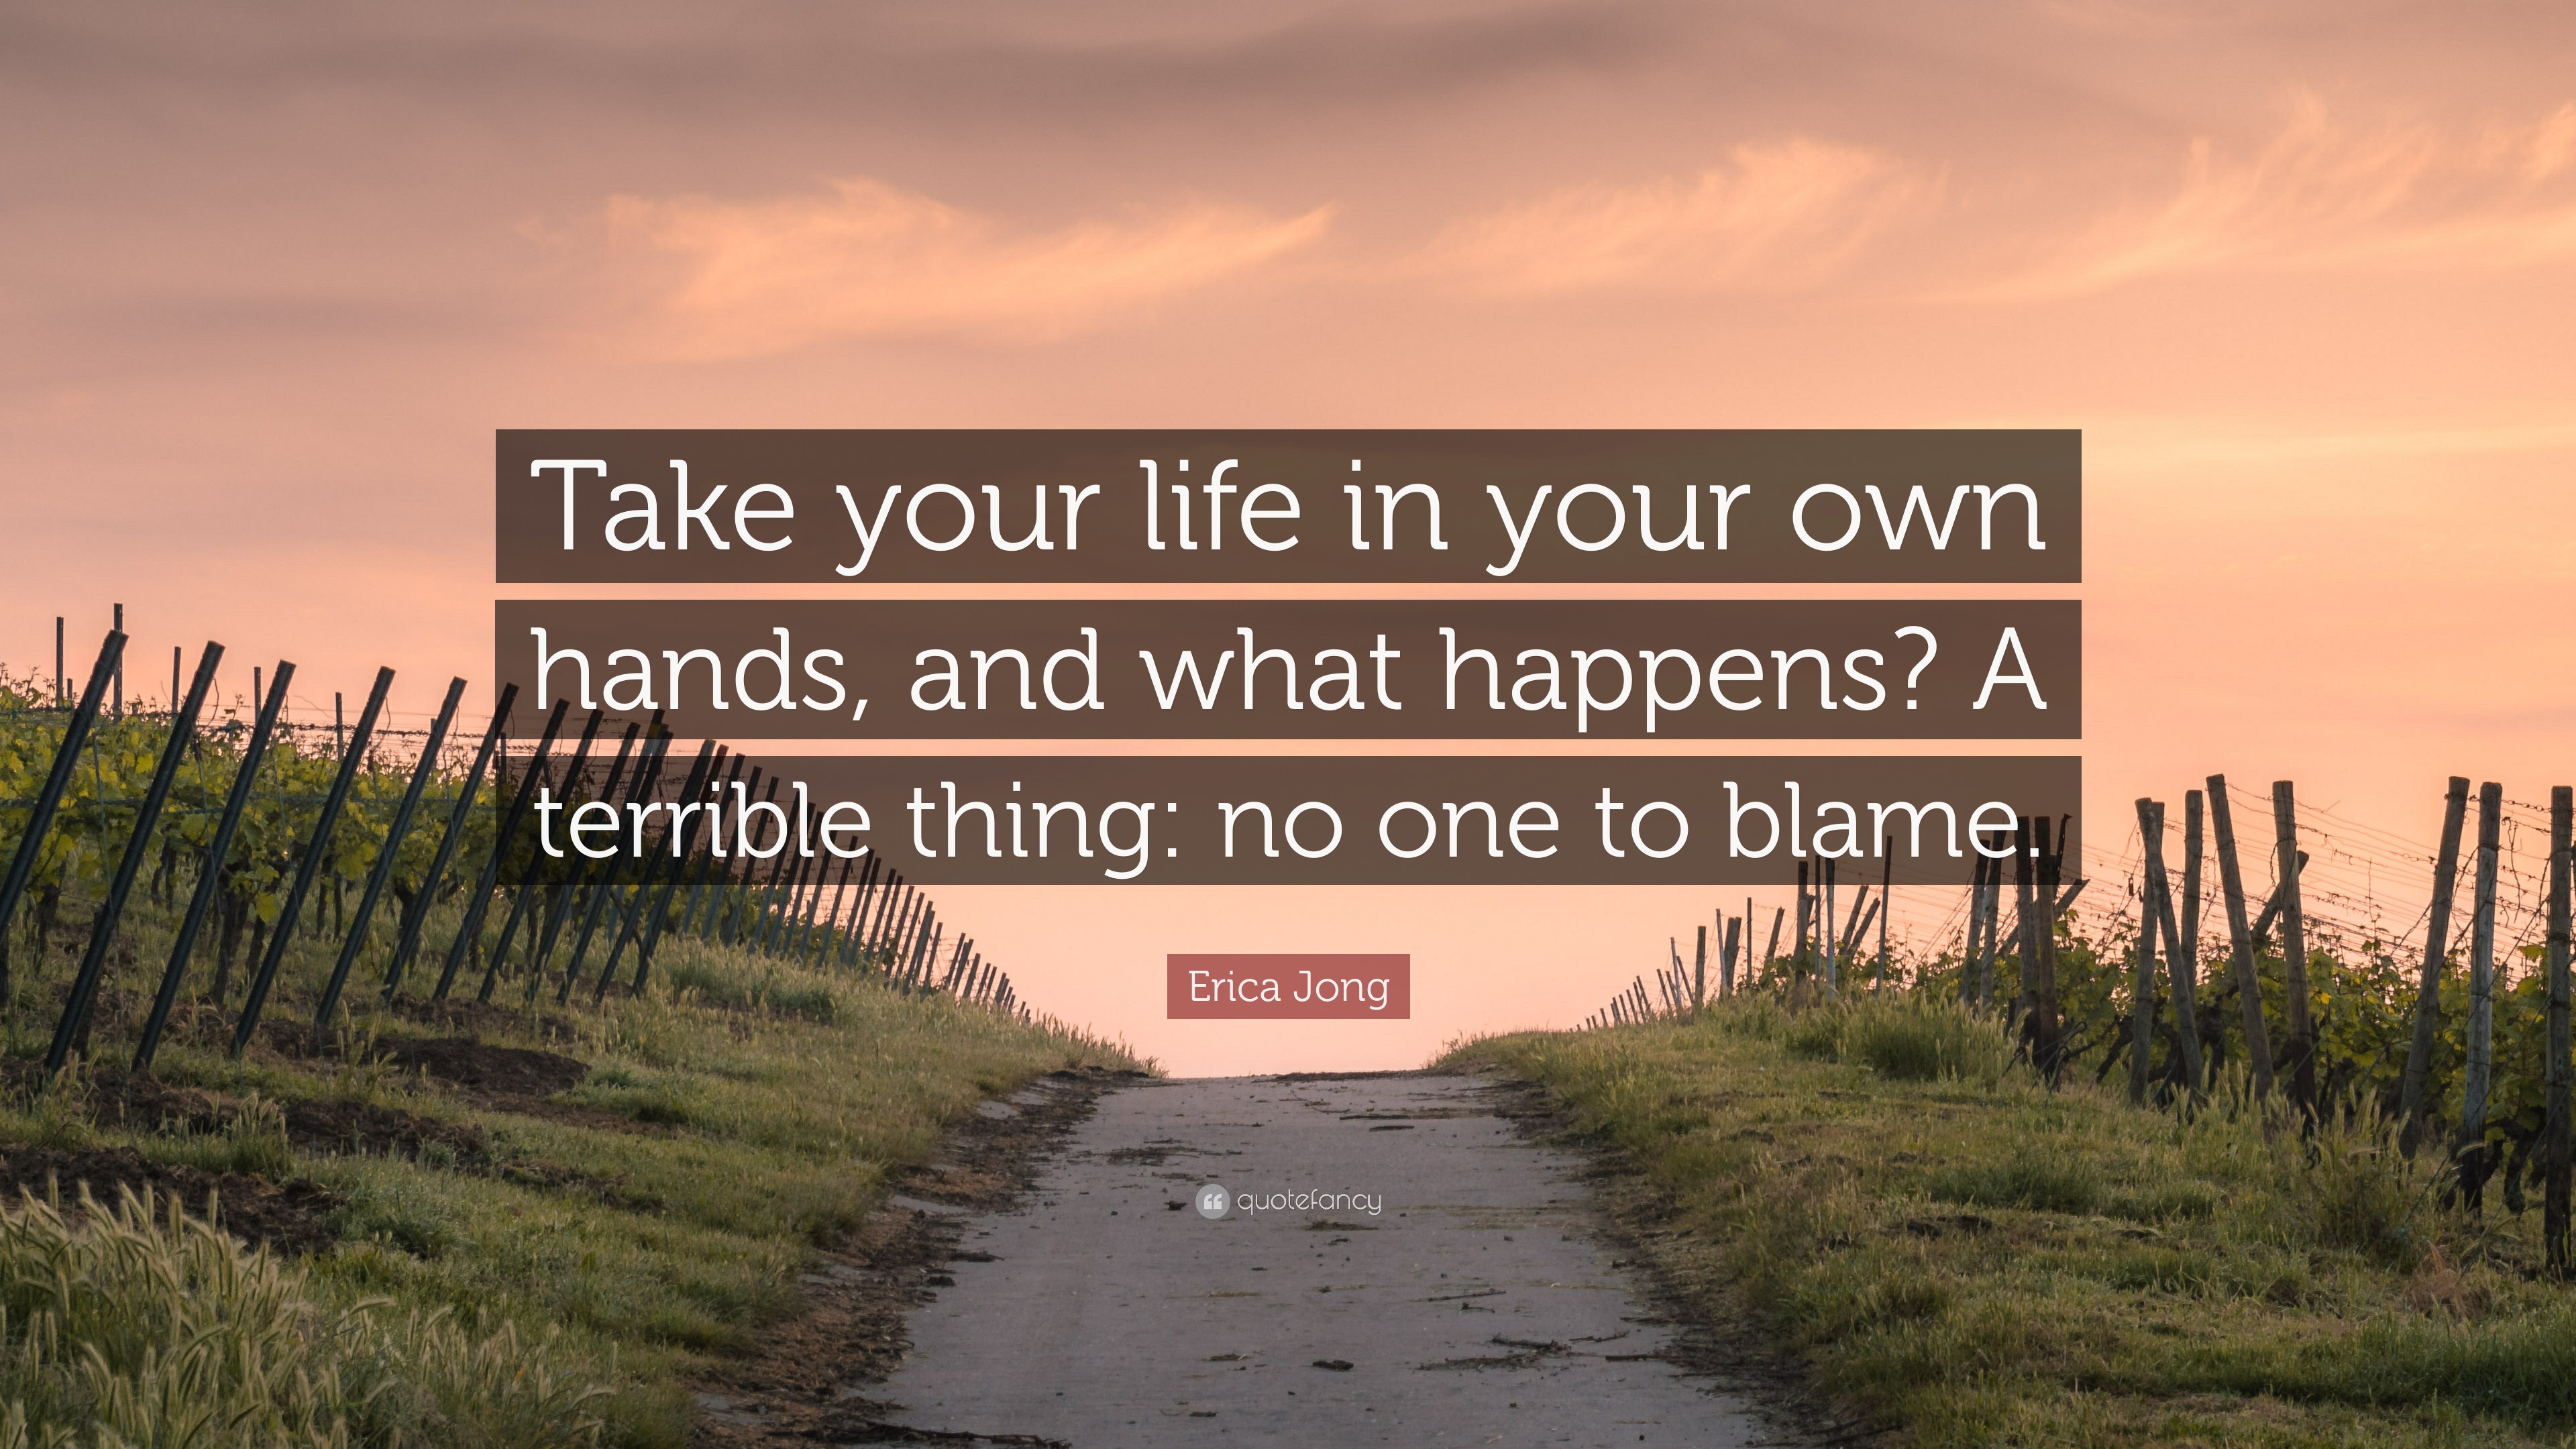 Erica Jong Quote Take Your Life In Your Own Hands And What Happens A Terrible Thing